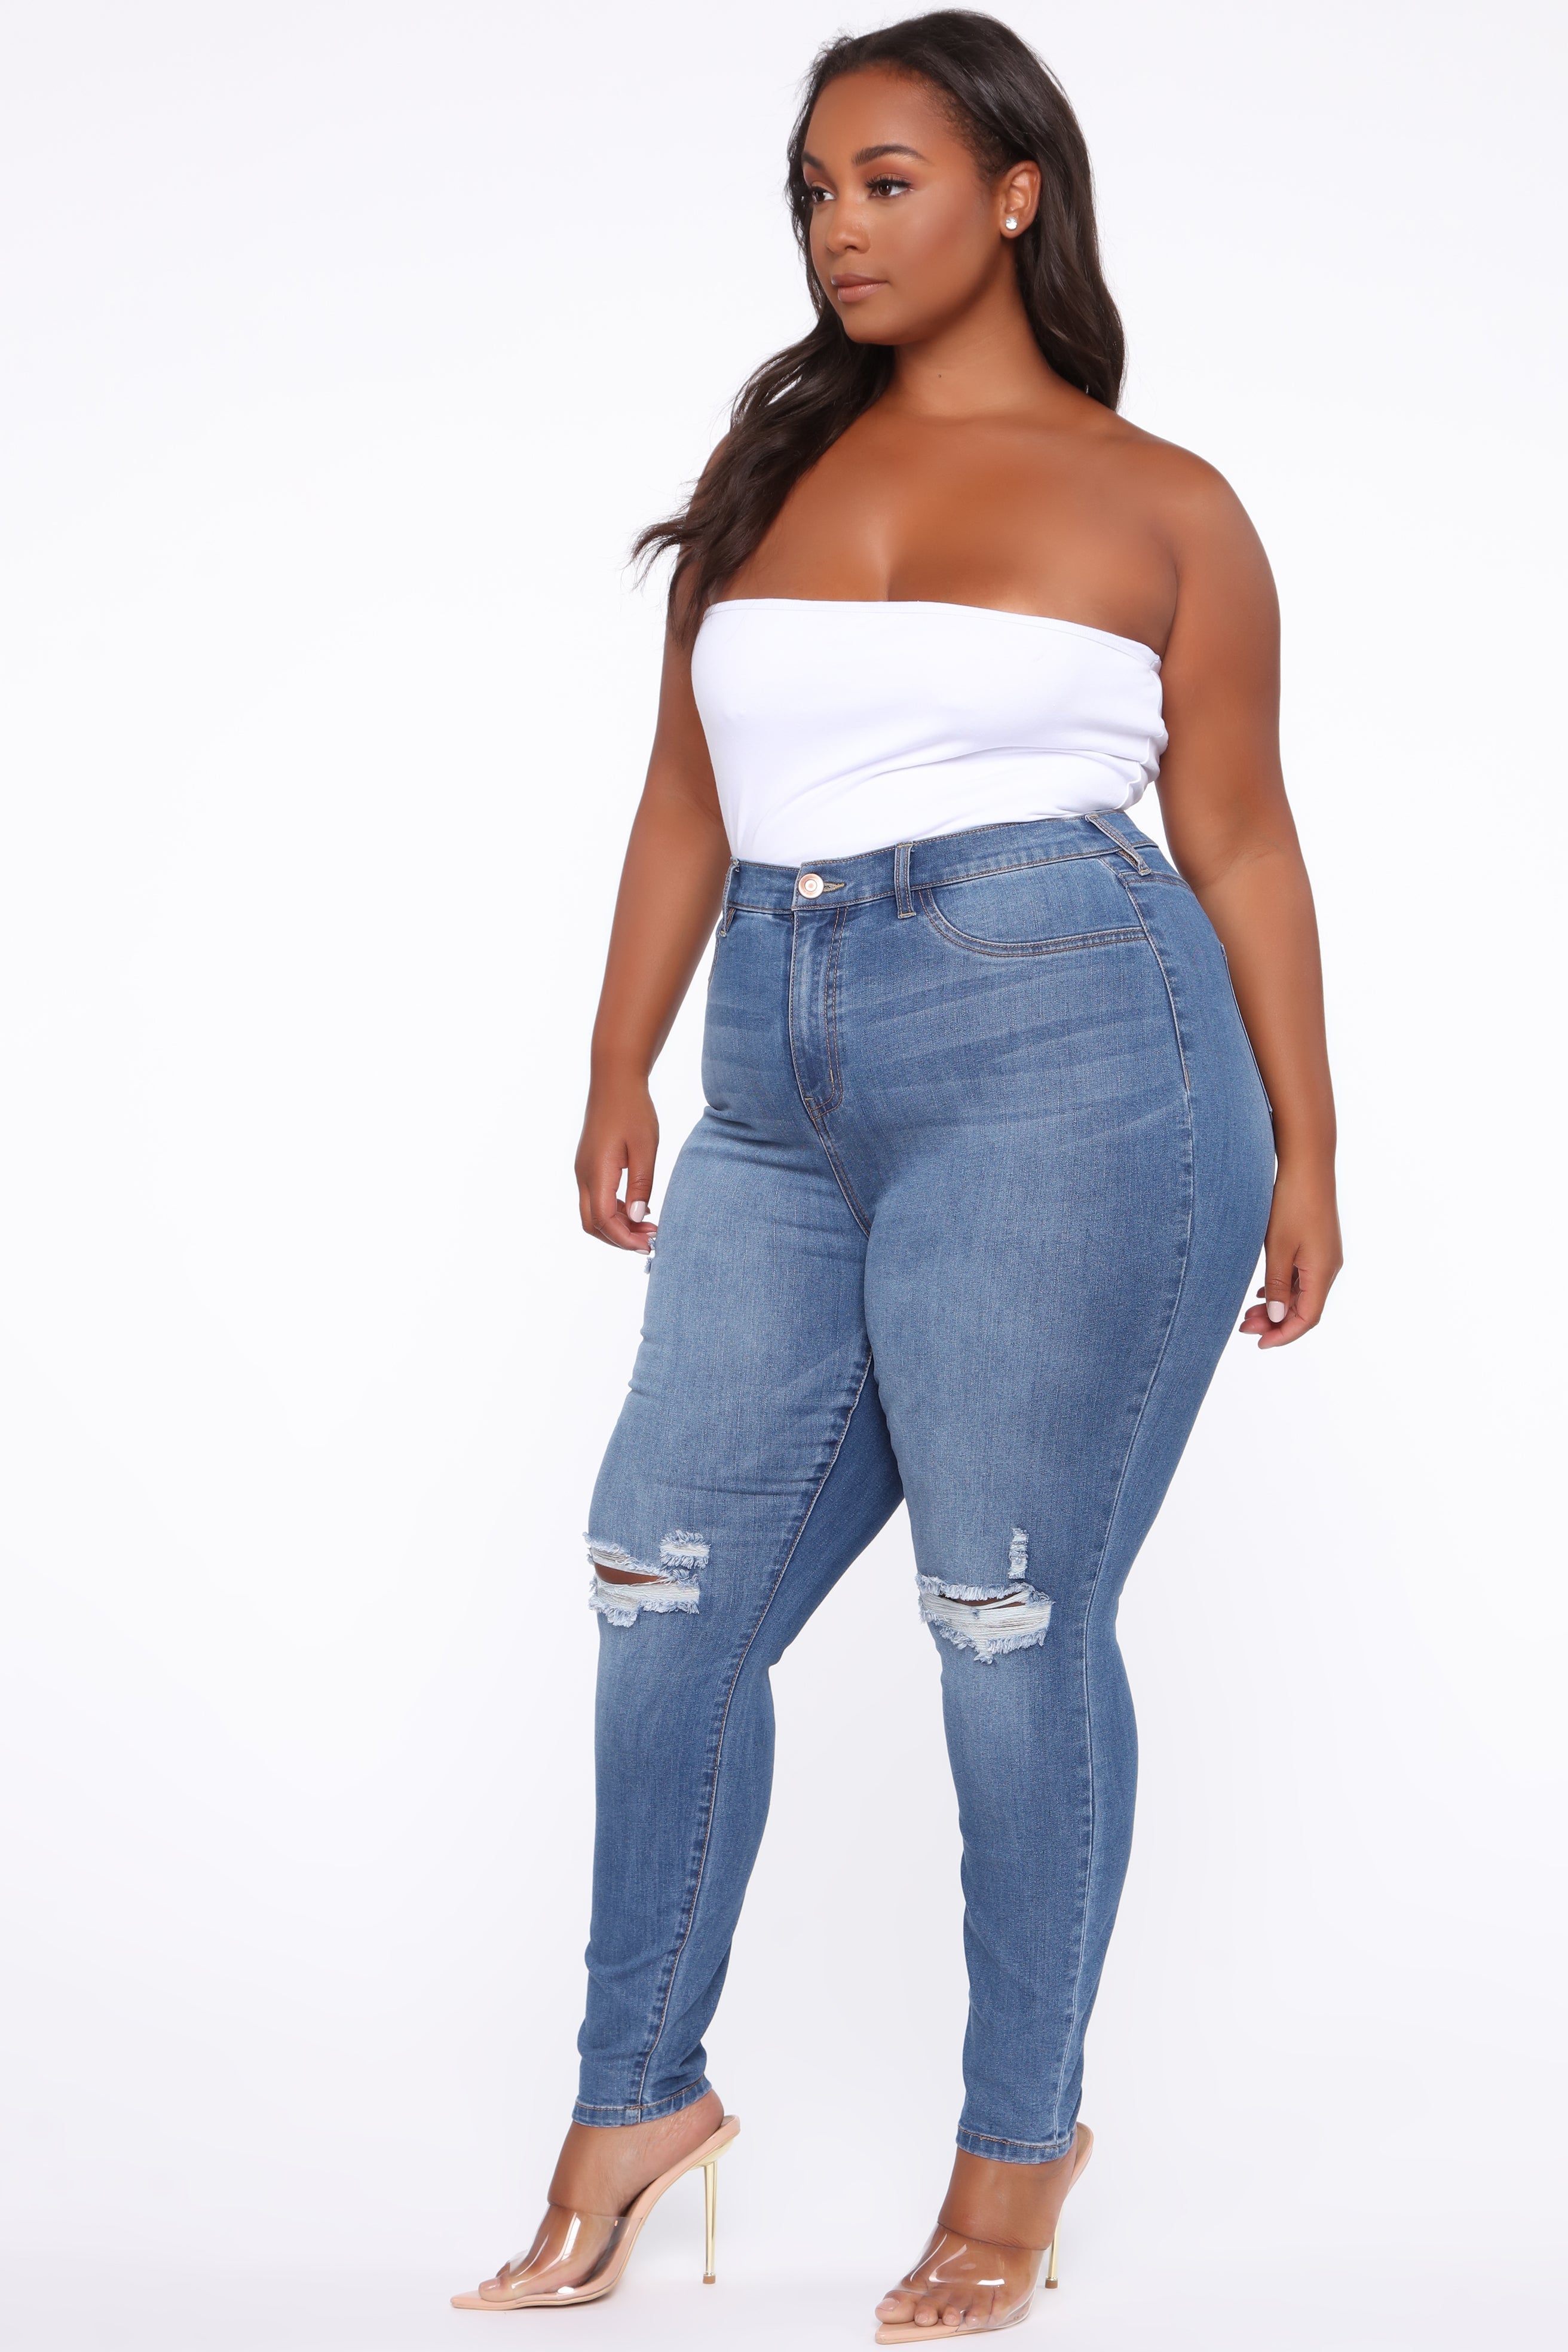 Our Favorite High Rise Skinny Jeans - Medium Blue Wash